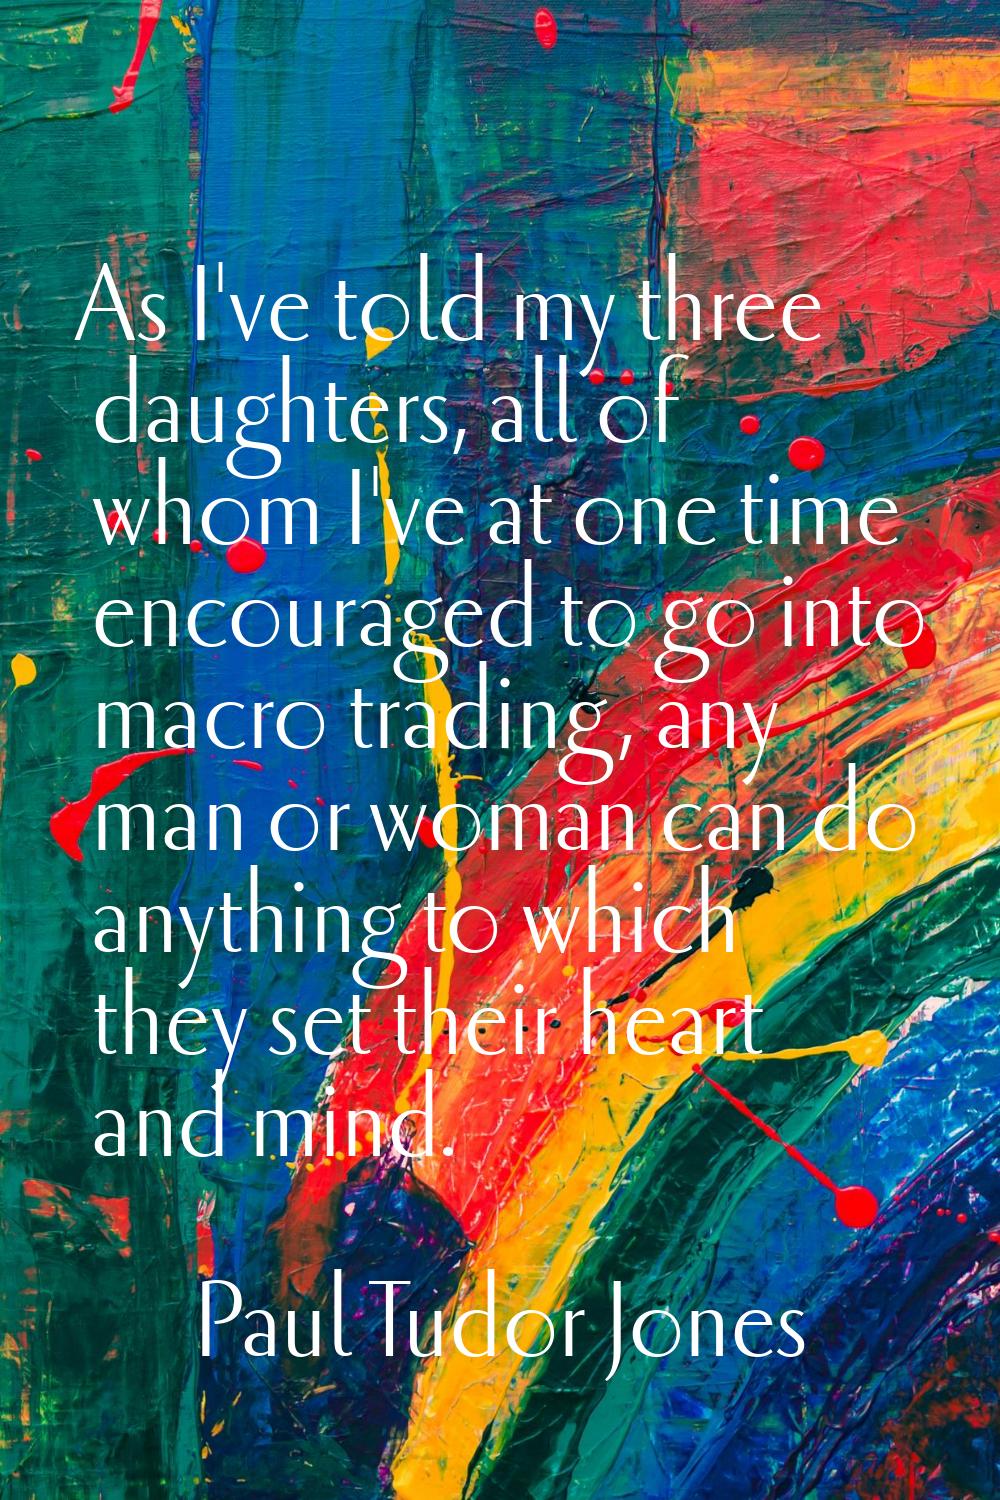 As I've told my three daughters, all of whom I've at one time encouraged to go into macro trading, 